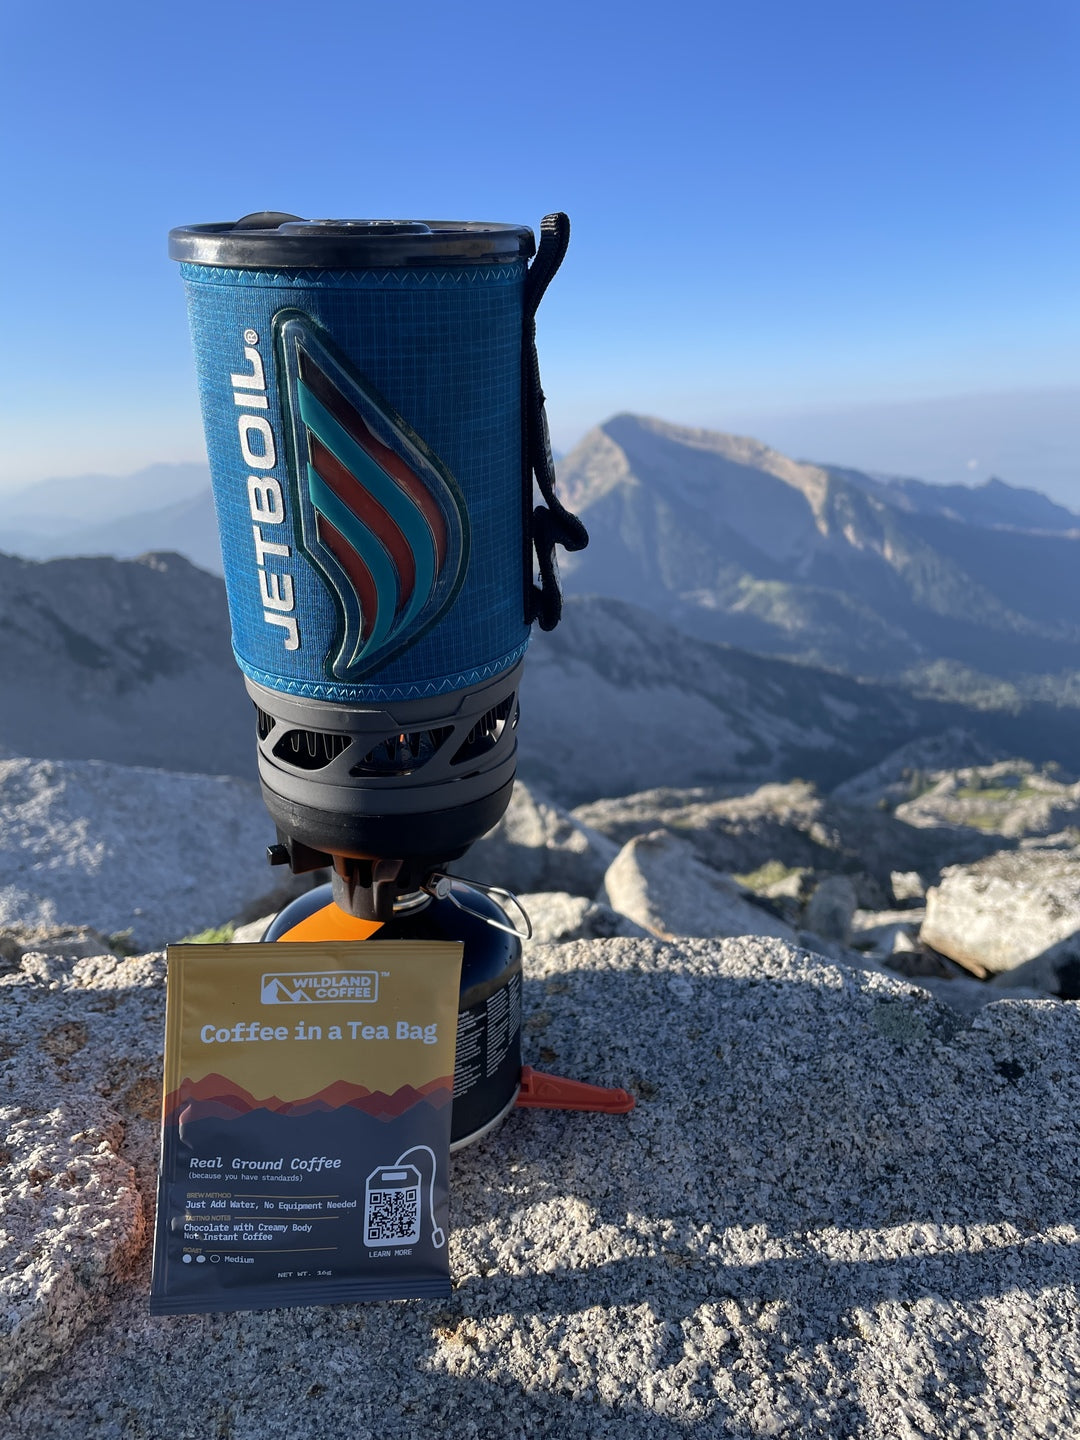 Picture of a Wildland Coffee pouch next to a Jetboil on the top of a mountain and overlooking other mountains. This coffee is perfect for on the go, hiking, backpacking, camping, and even just quick coffee at home.